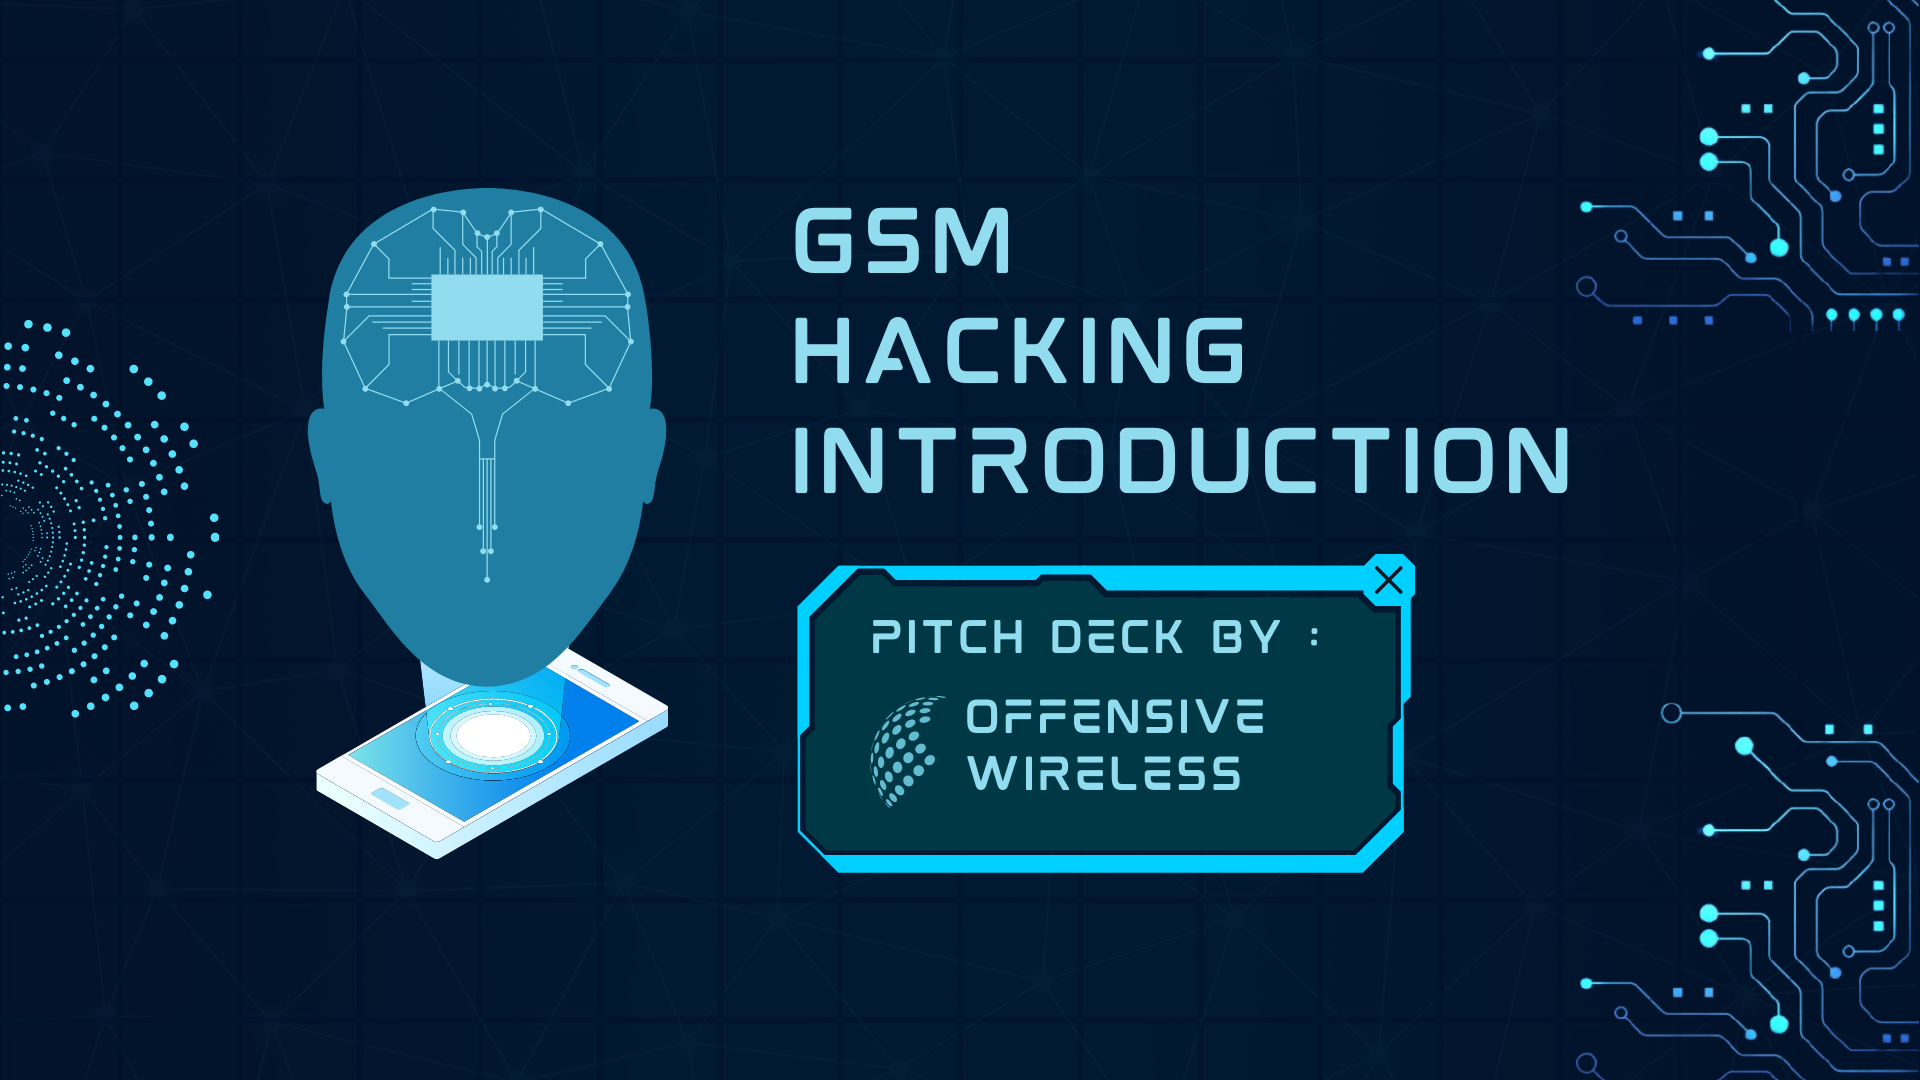 GSM Hacking Introduction